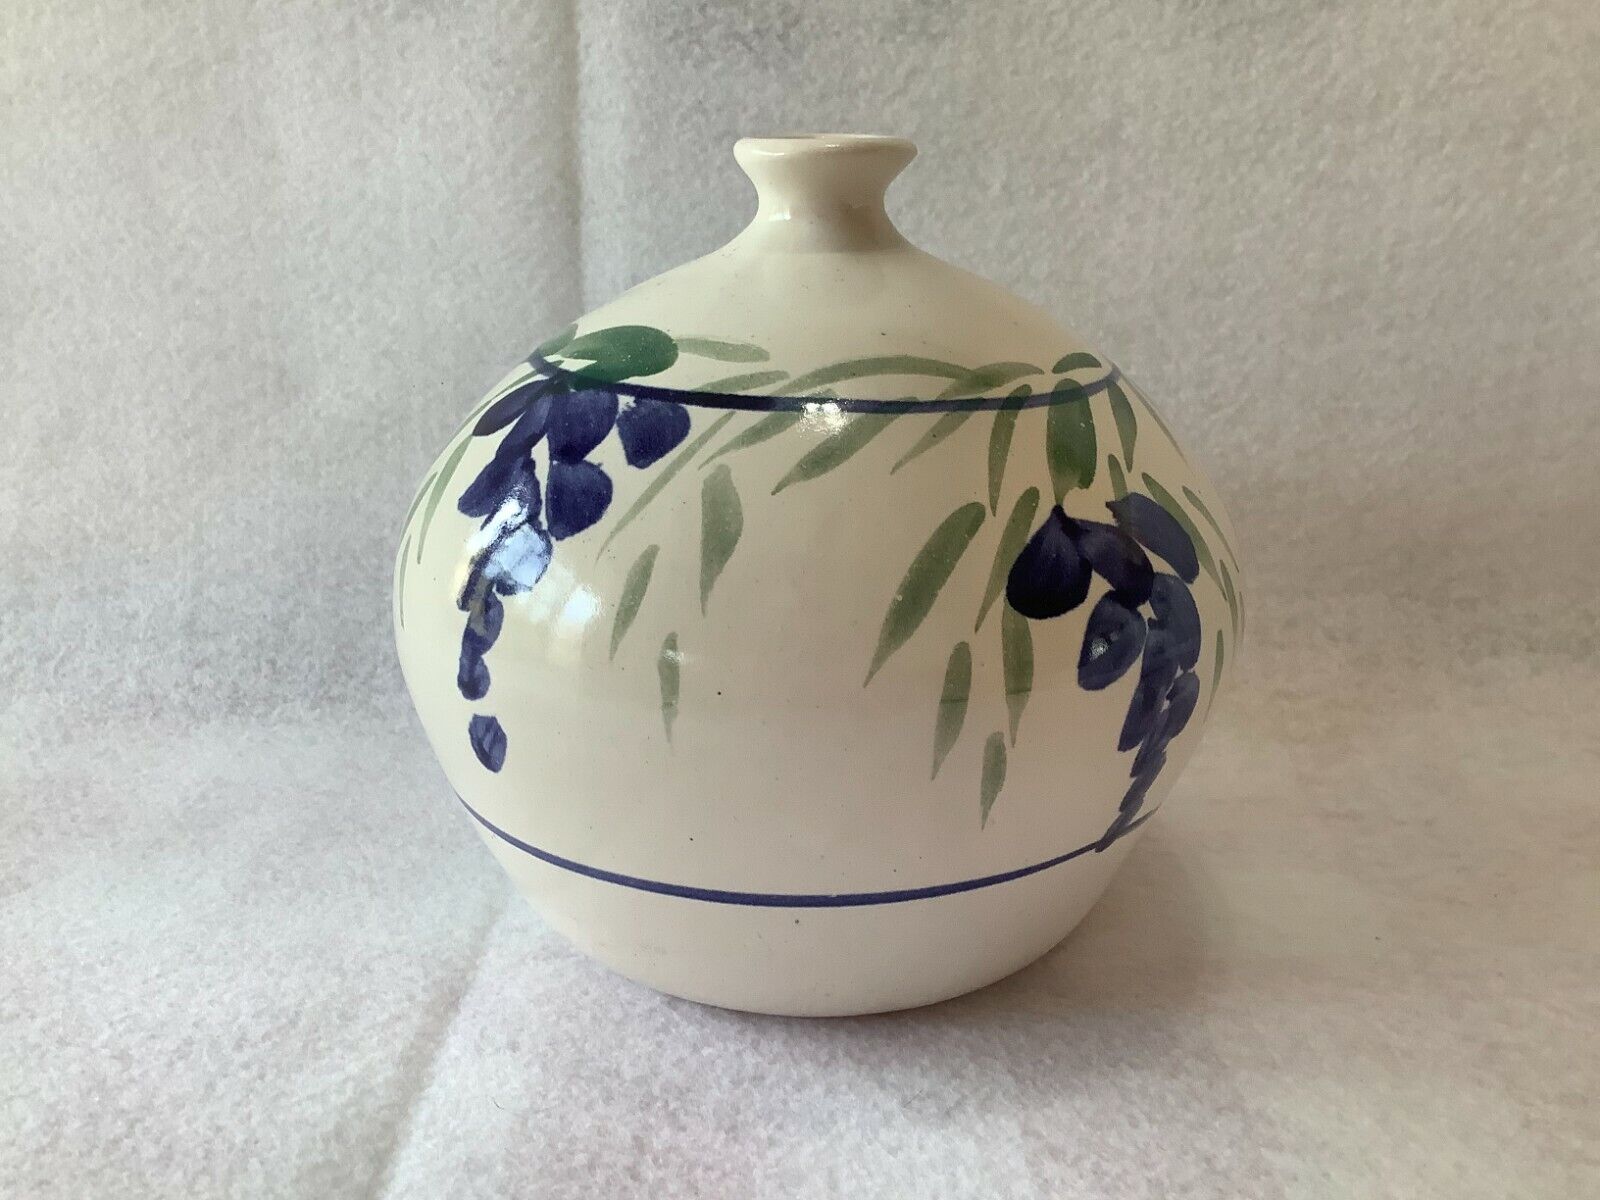 Italian hand Crafted Vase, Grape and Leaf Design, Artist Signed Pottery Decor